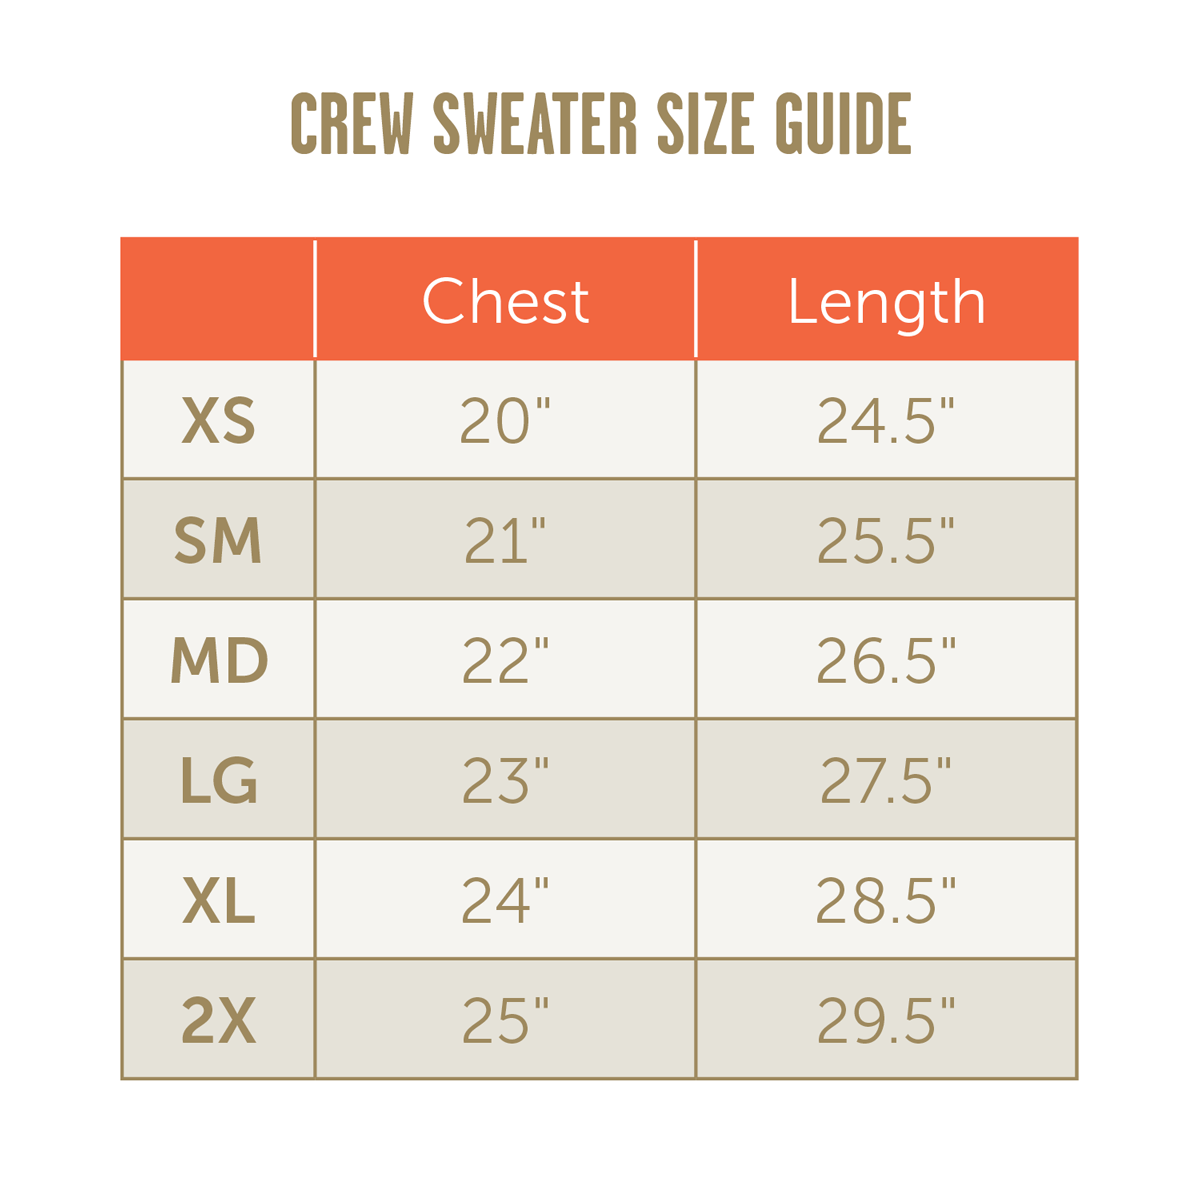 TLE Adult unisex crew sweater size guide 